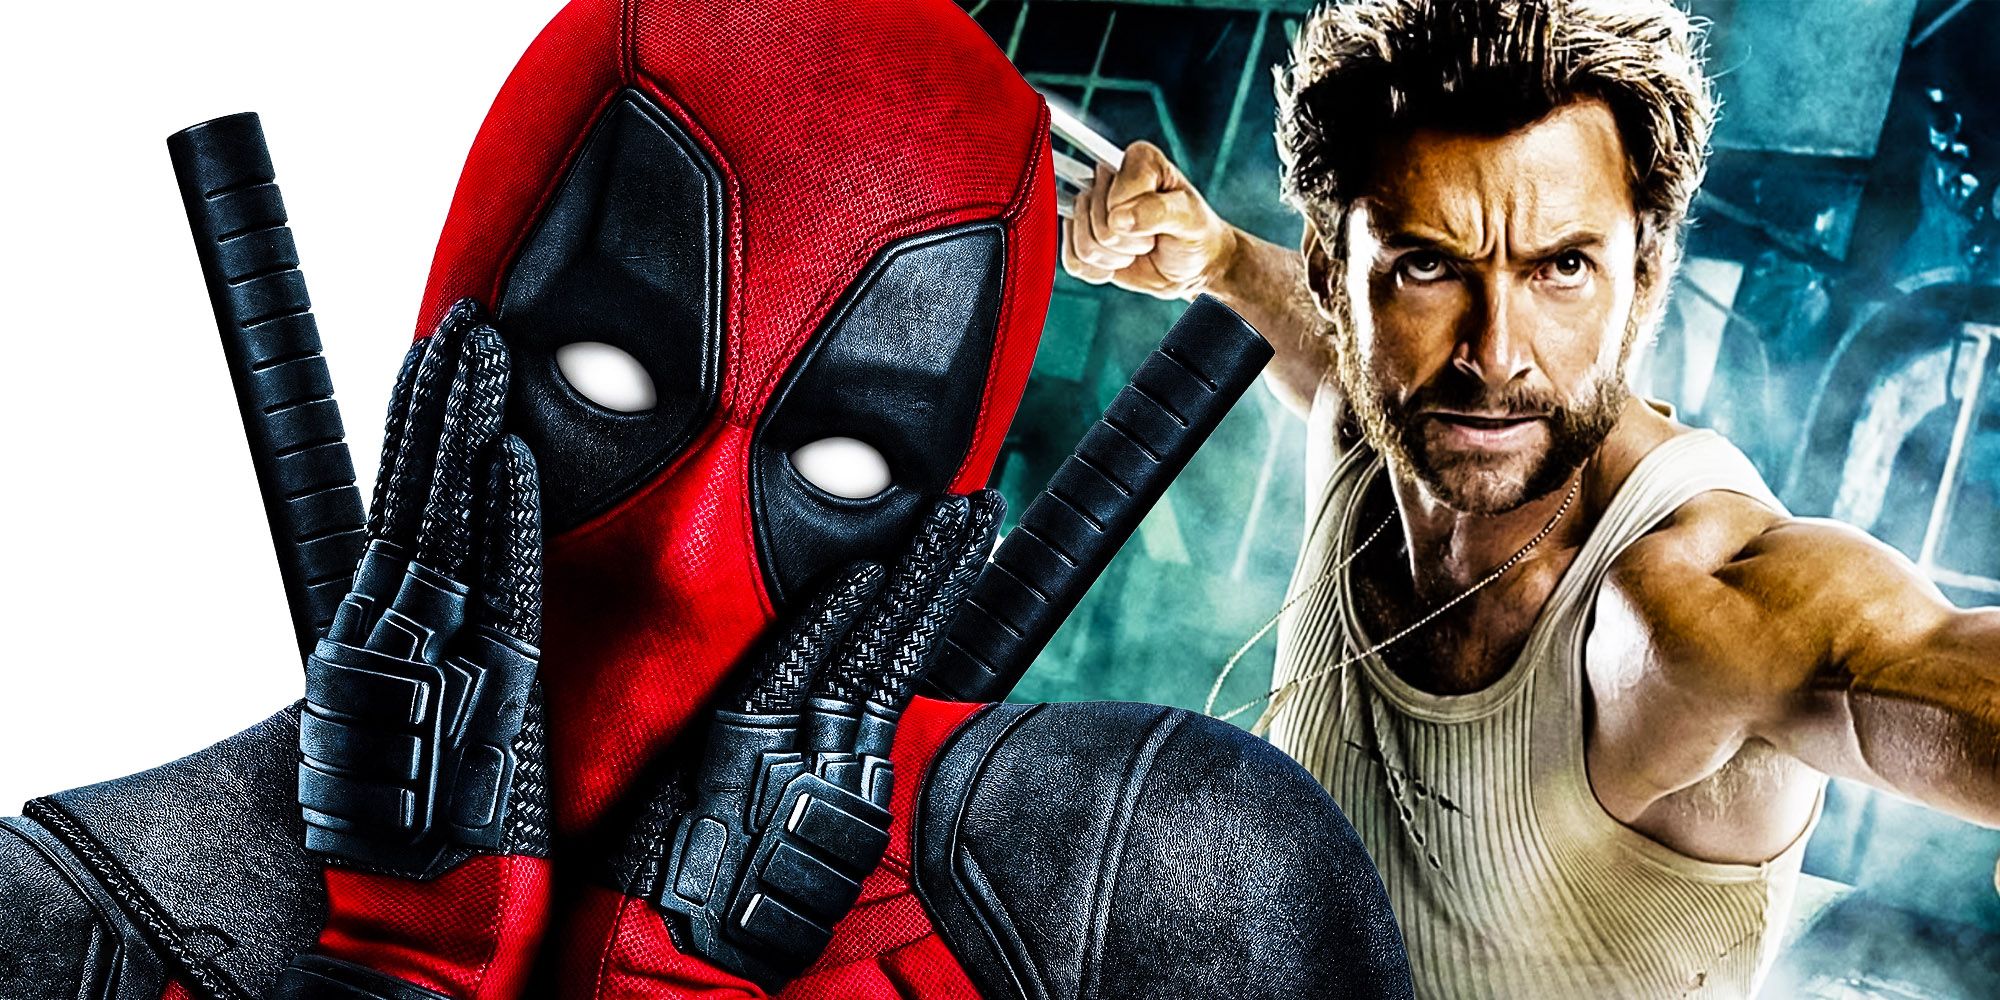 a masked Deadpool cradles his face adorably; Wolverine (Hugh Jackman) rushes into battle